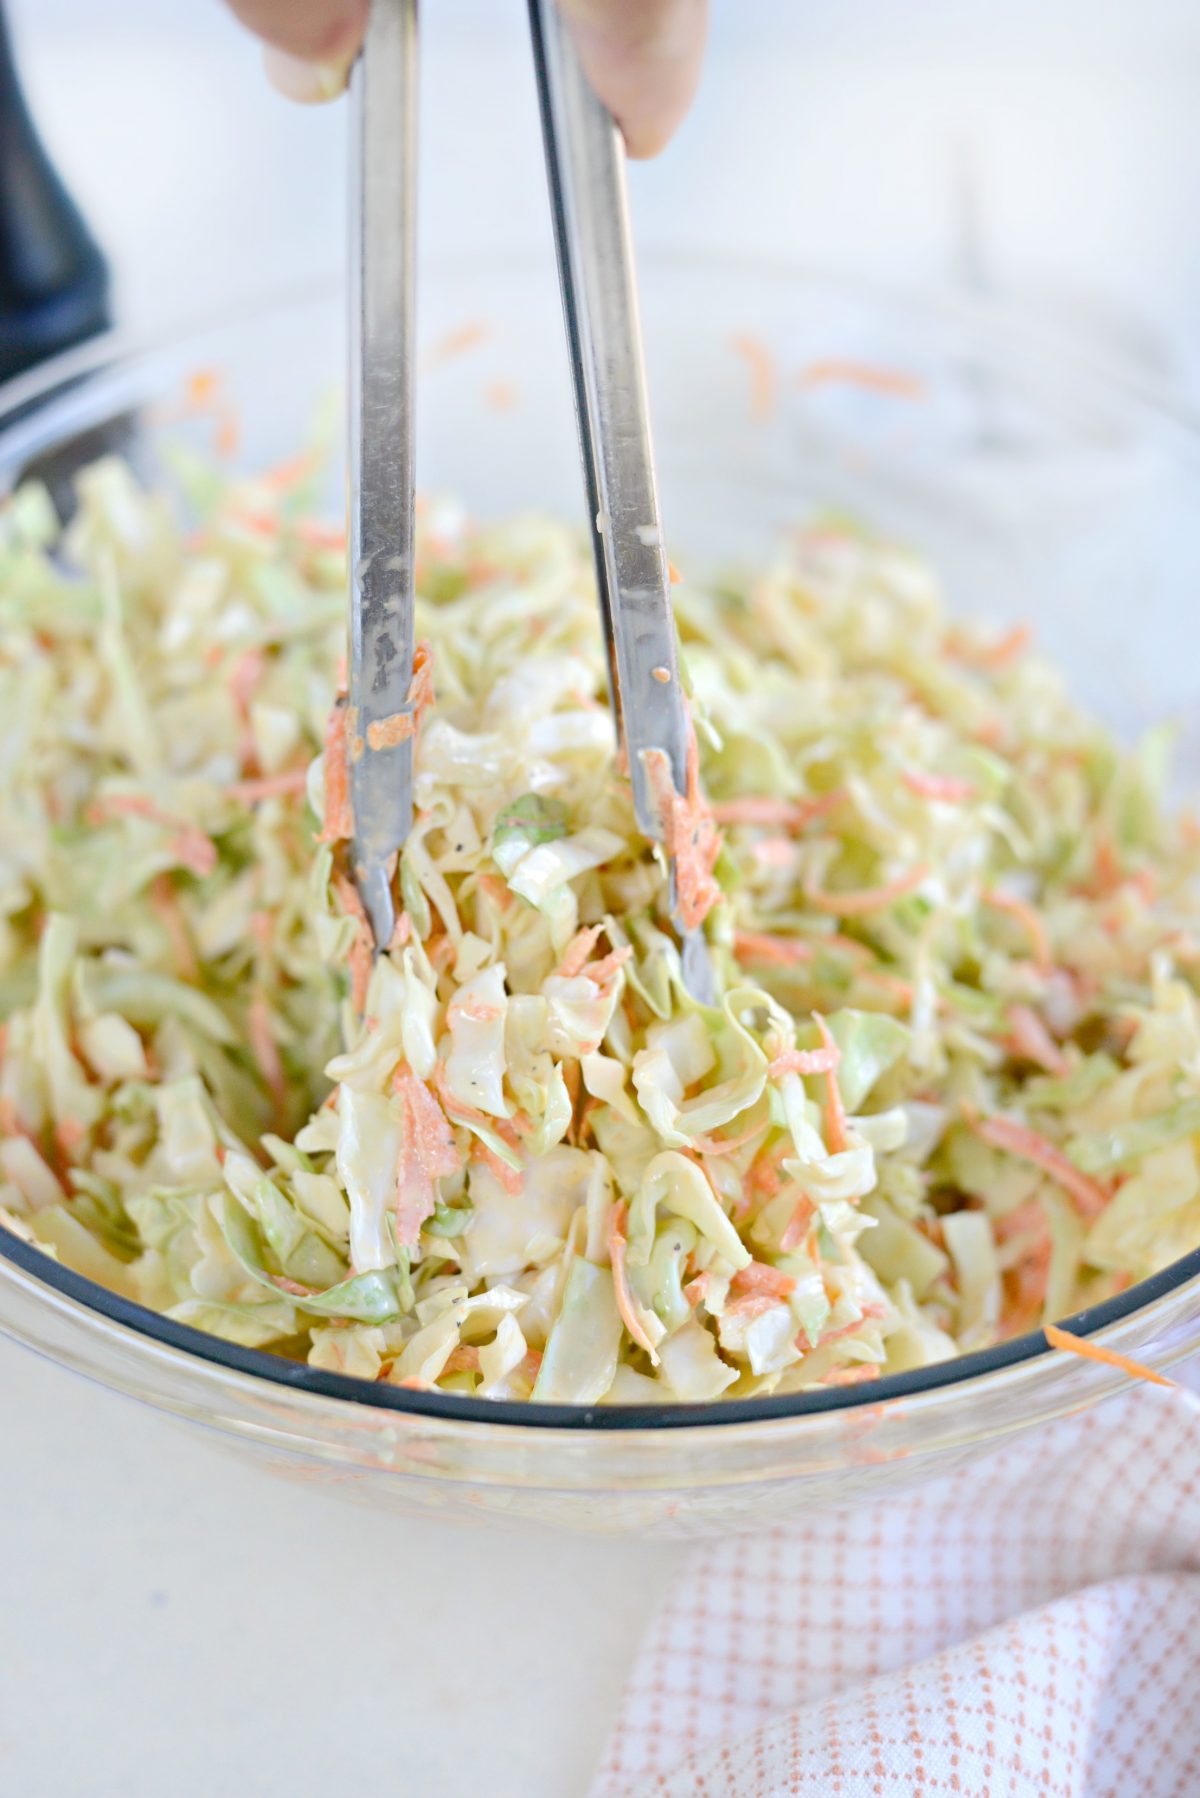 Classic Coleslaw Recipe with Homemade Dressing l SimplyScratch.com (10)